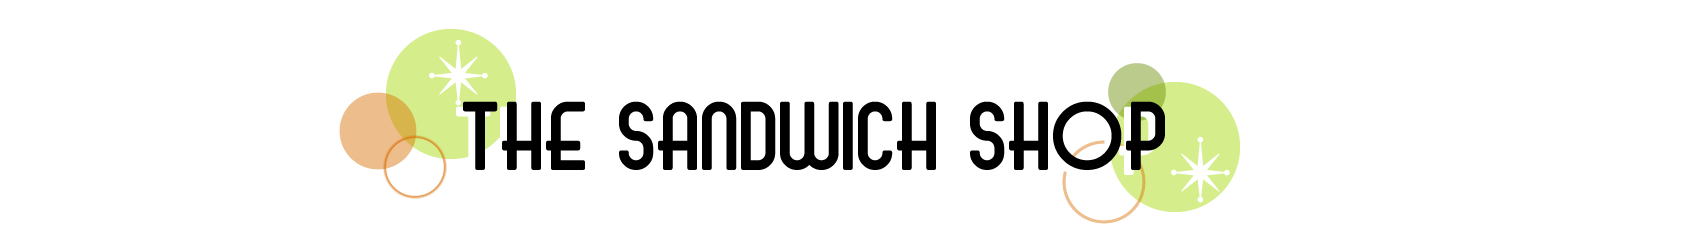 a retro style title The Sandwich Shop with green and orange circles